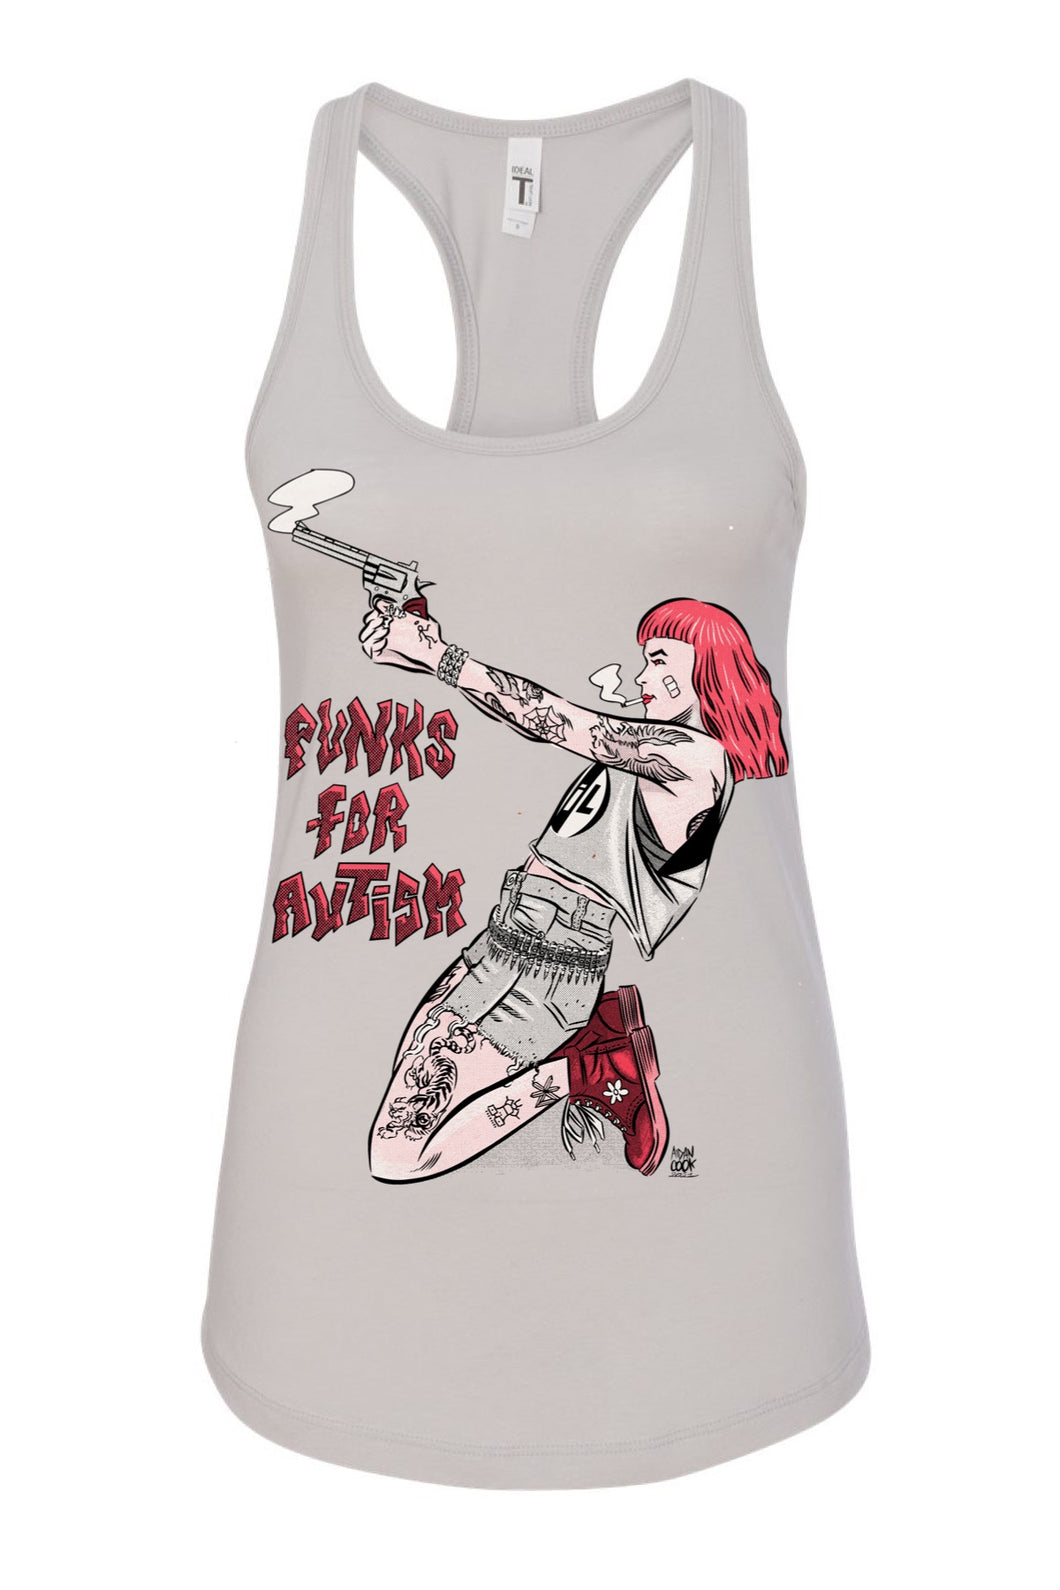 Punks for Autism - Tank Top - Girl Punk